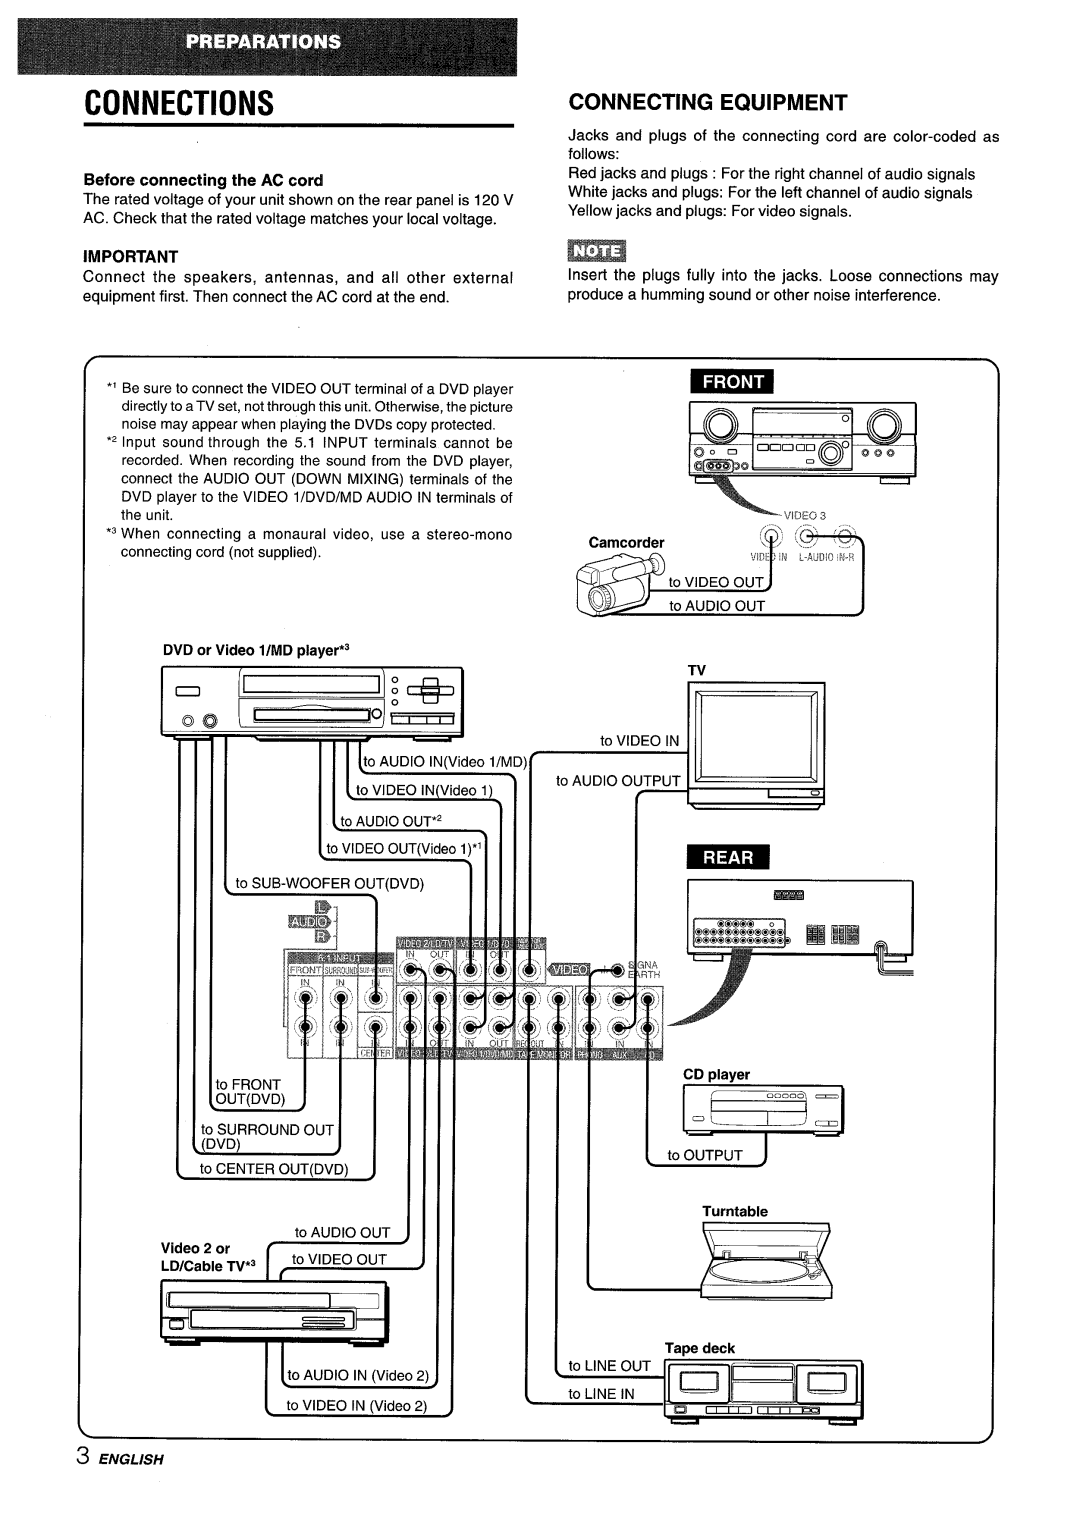 Aiwa AV-D35 manual Ii I, Connections, 1111 Ill, Connecting Equipment, Before connecting the AC cord, Camcorder, Turntable 